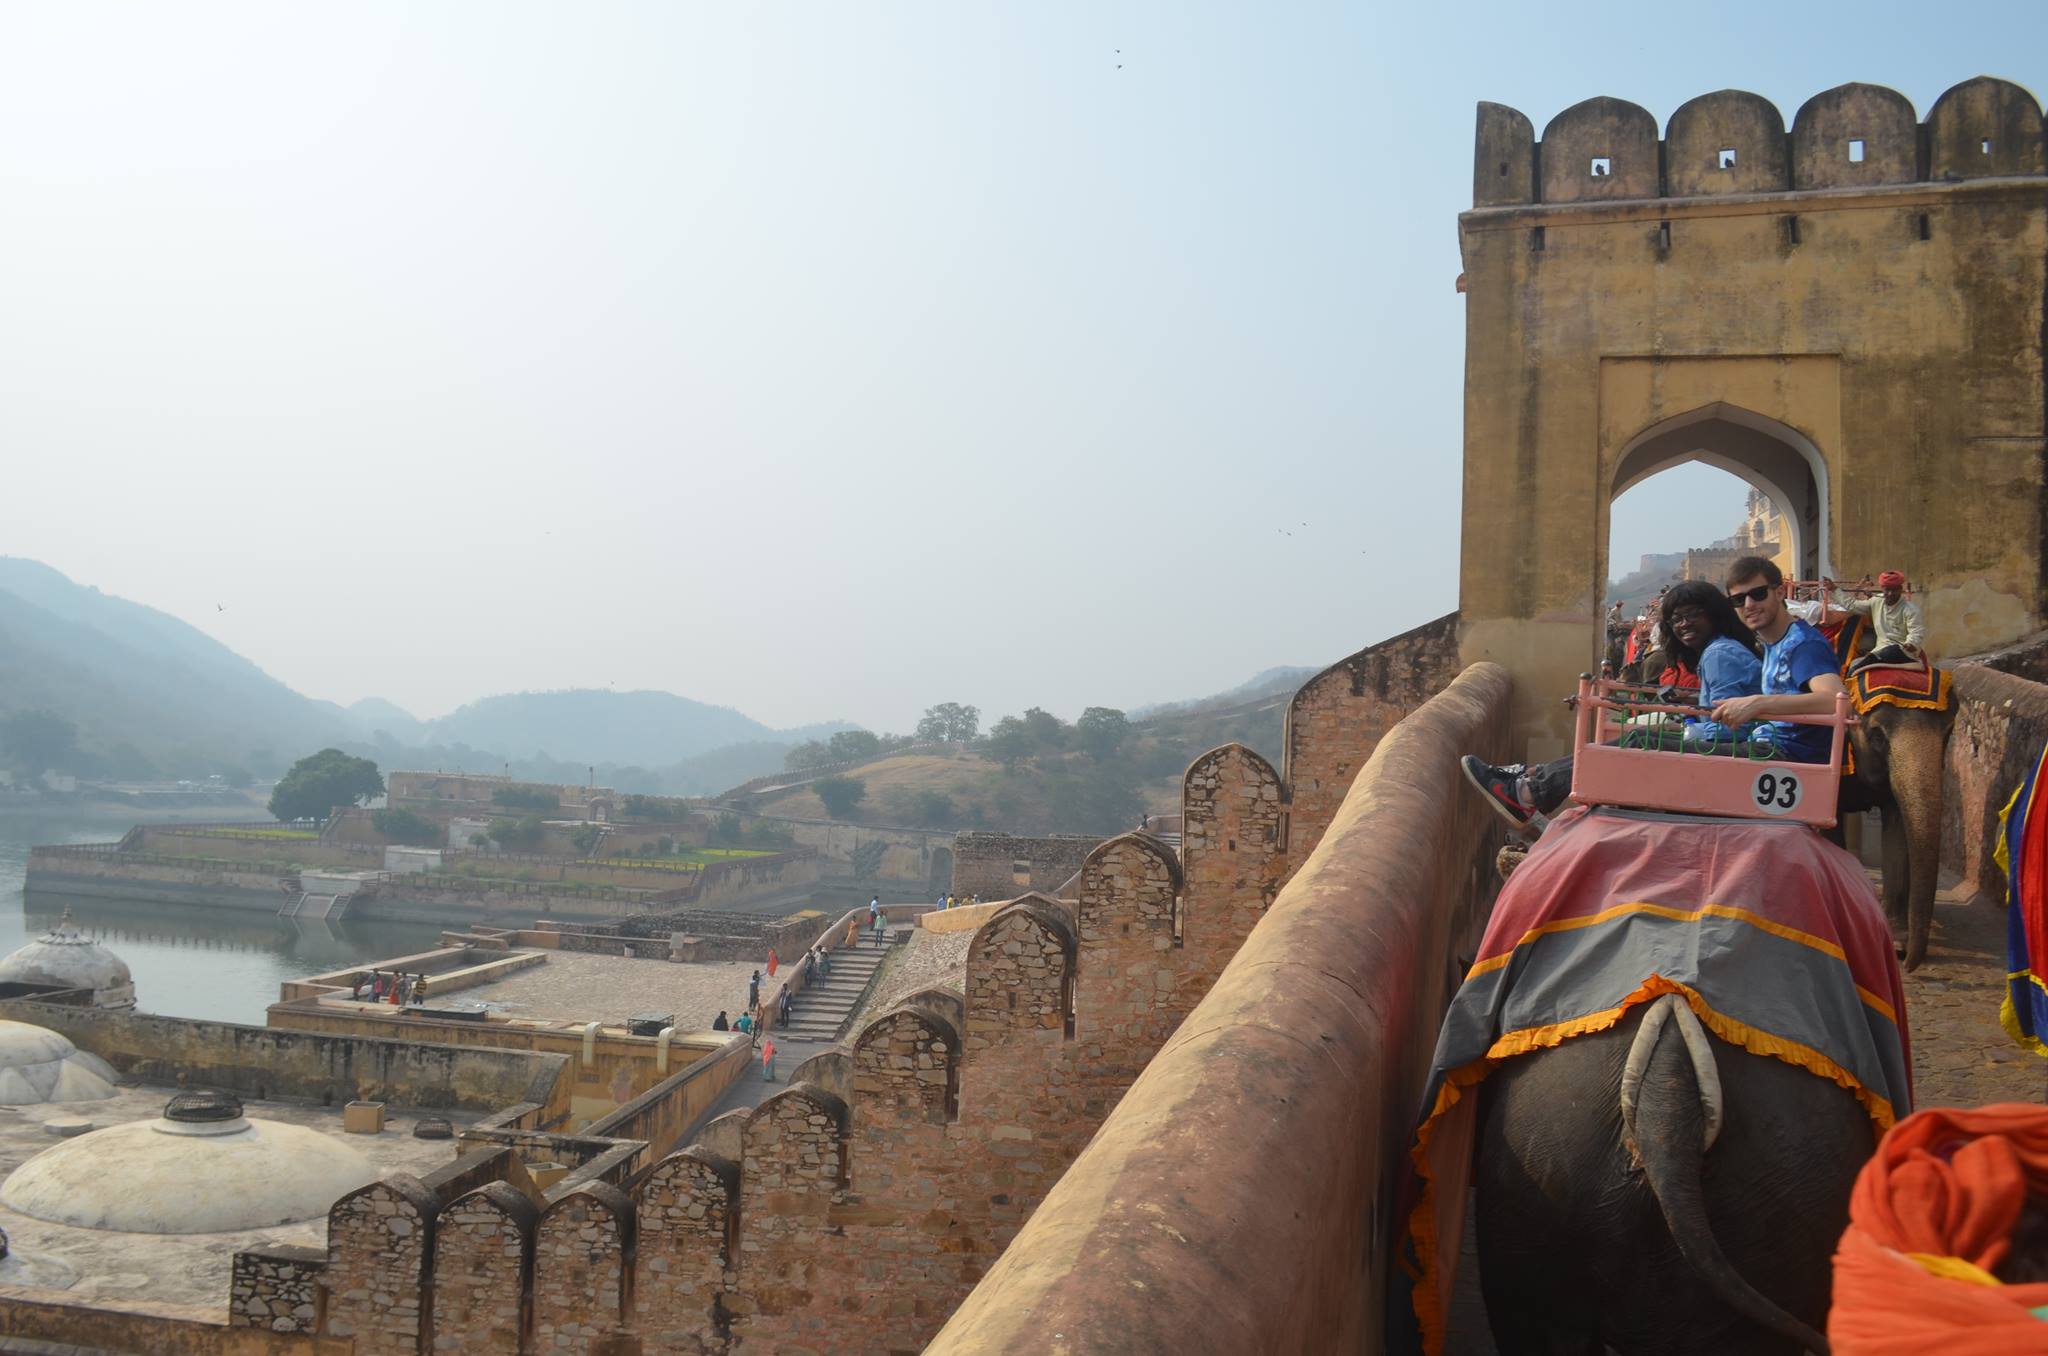 Allana Nelson (’17) and Brandon Schwartz (’17) riding an elephant at the Amber Fort in Jaipur, India.